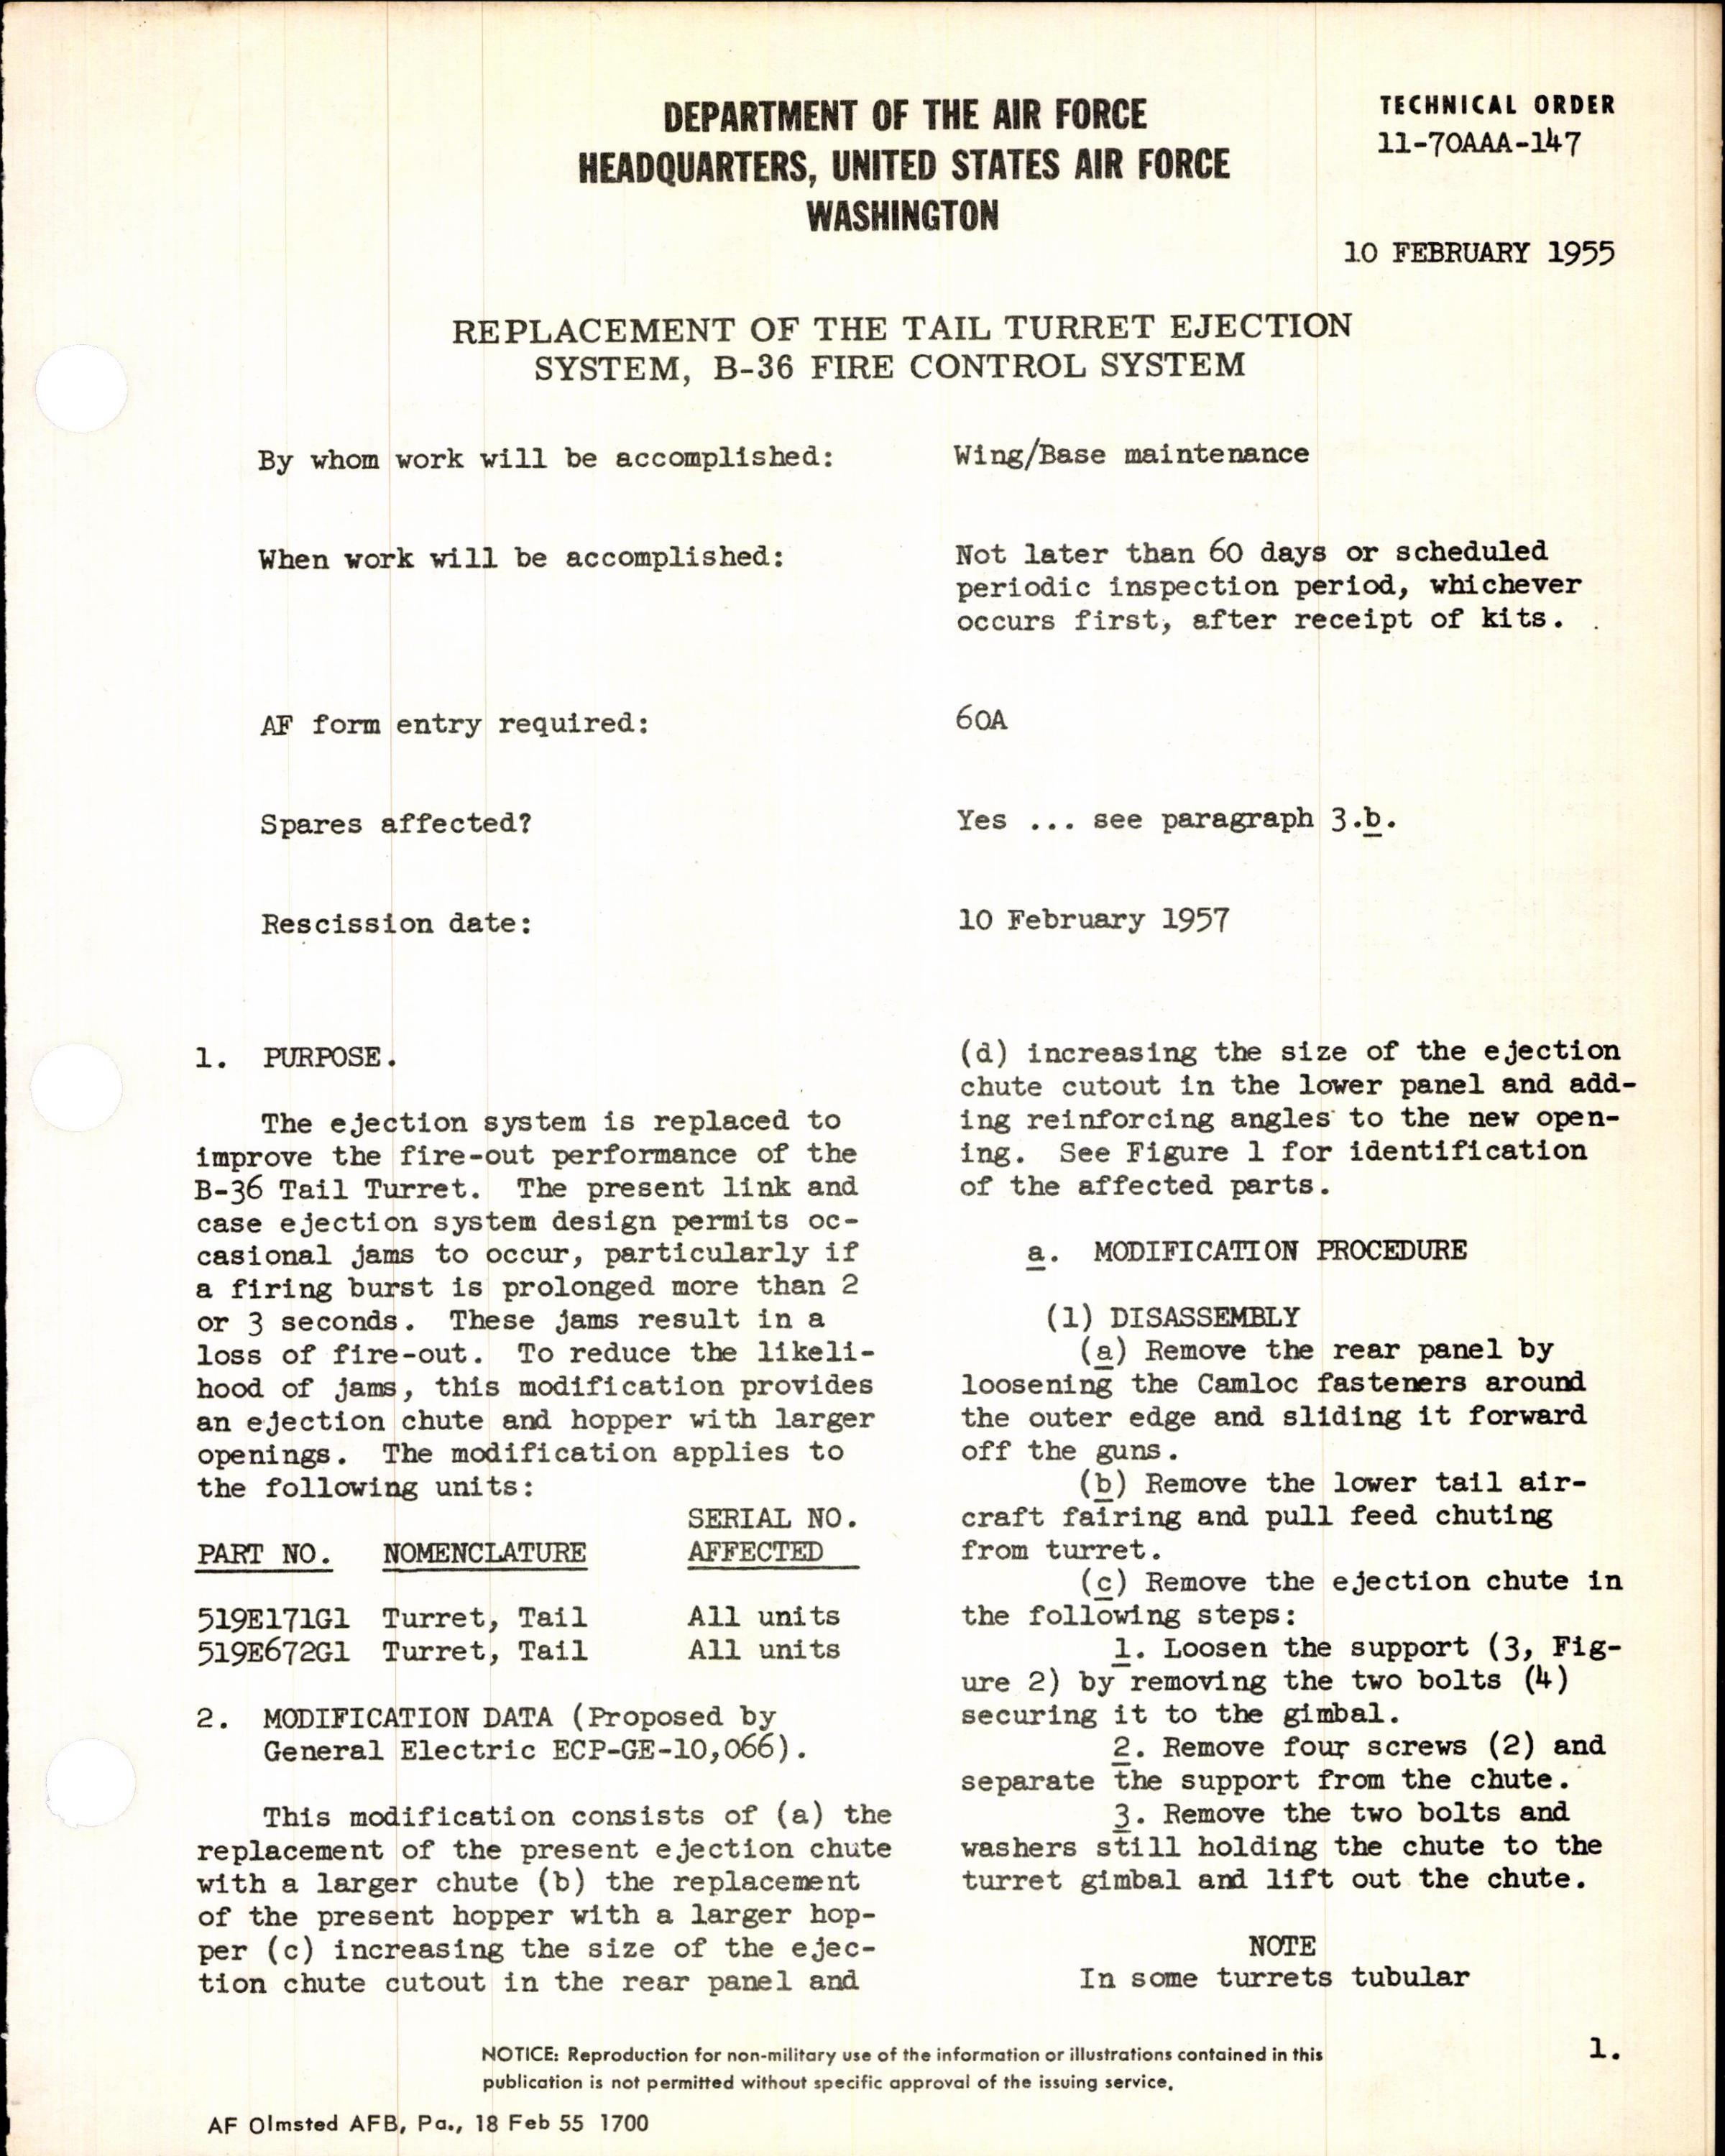 Sample page 1 from AirCorps Library document: Replacement of the Tail Turret Ejection System for the B-36 Fire Control System